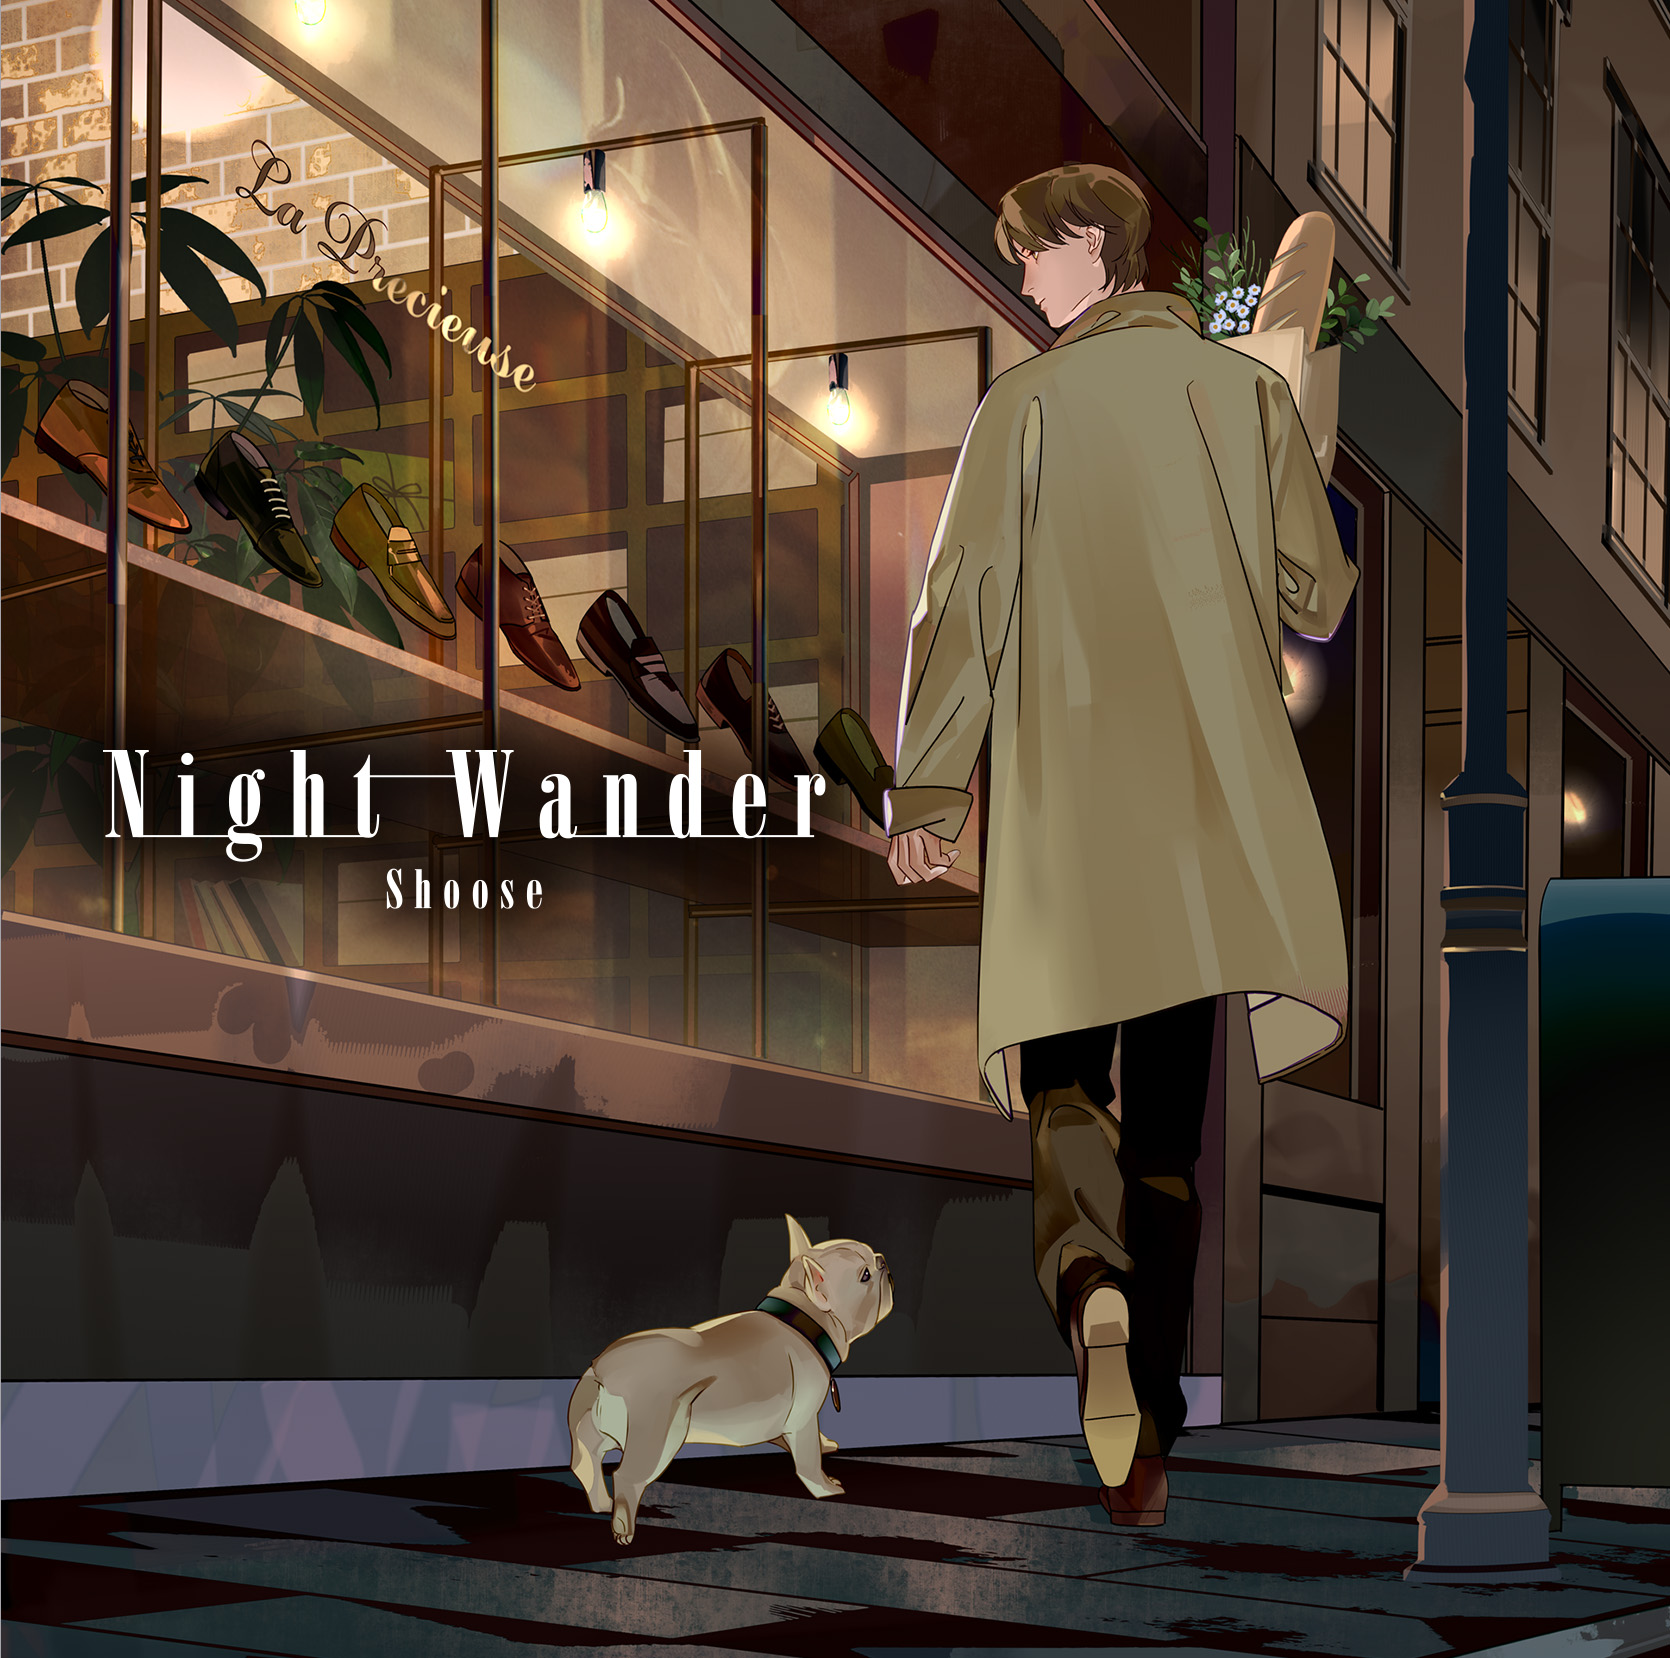 Shoose "Night Wander" XYZP Limited Version(CD+DVD+Photobook)Release on January 5th 2022